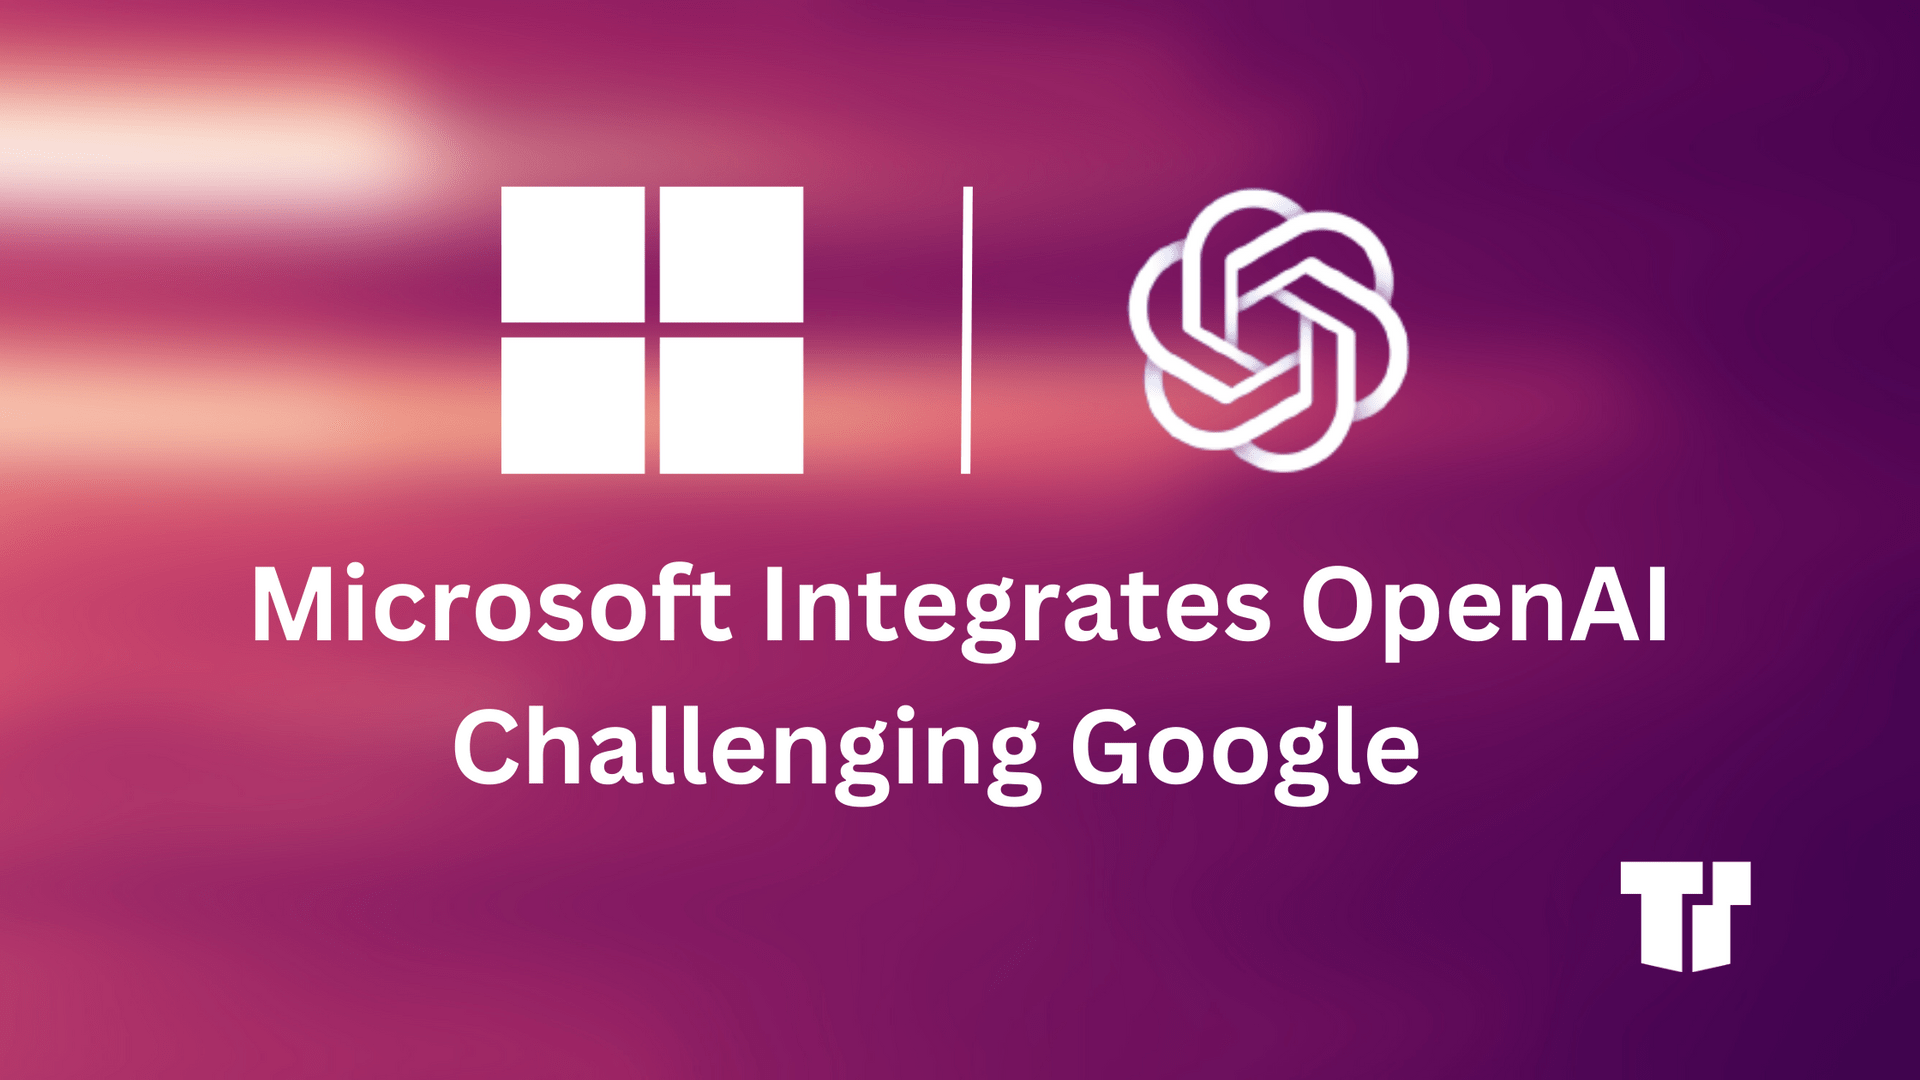 Microsoft Aims to Leverage Open AI's GPT-3 to Revolutionize Bing and Overtake Google cover image